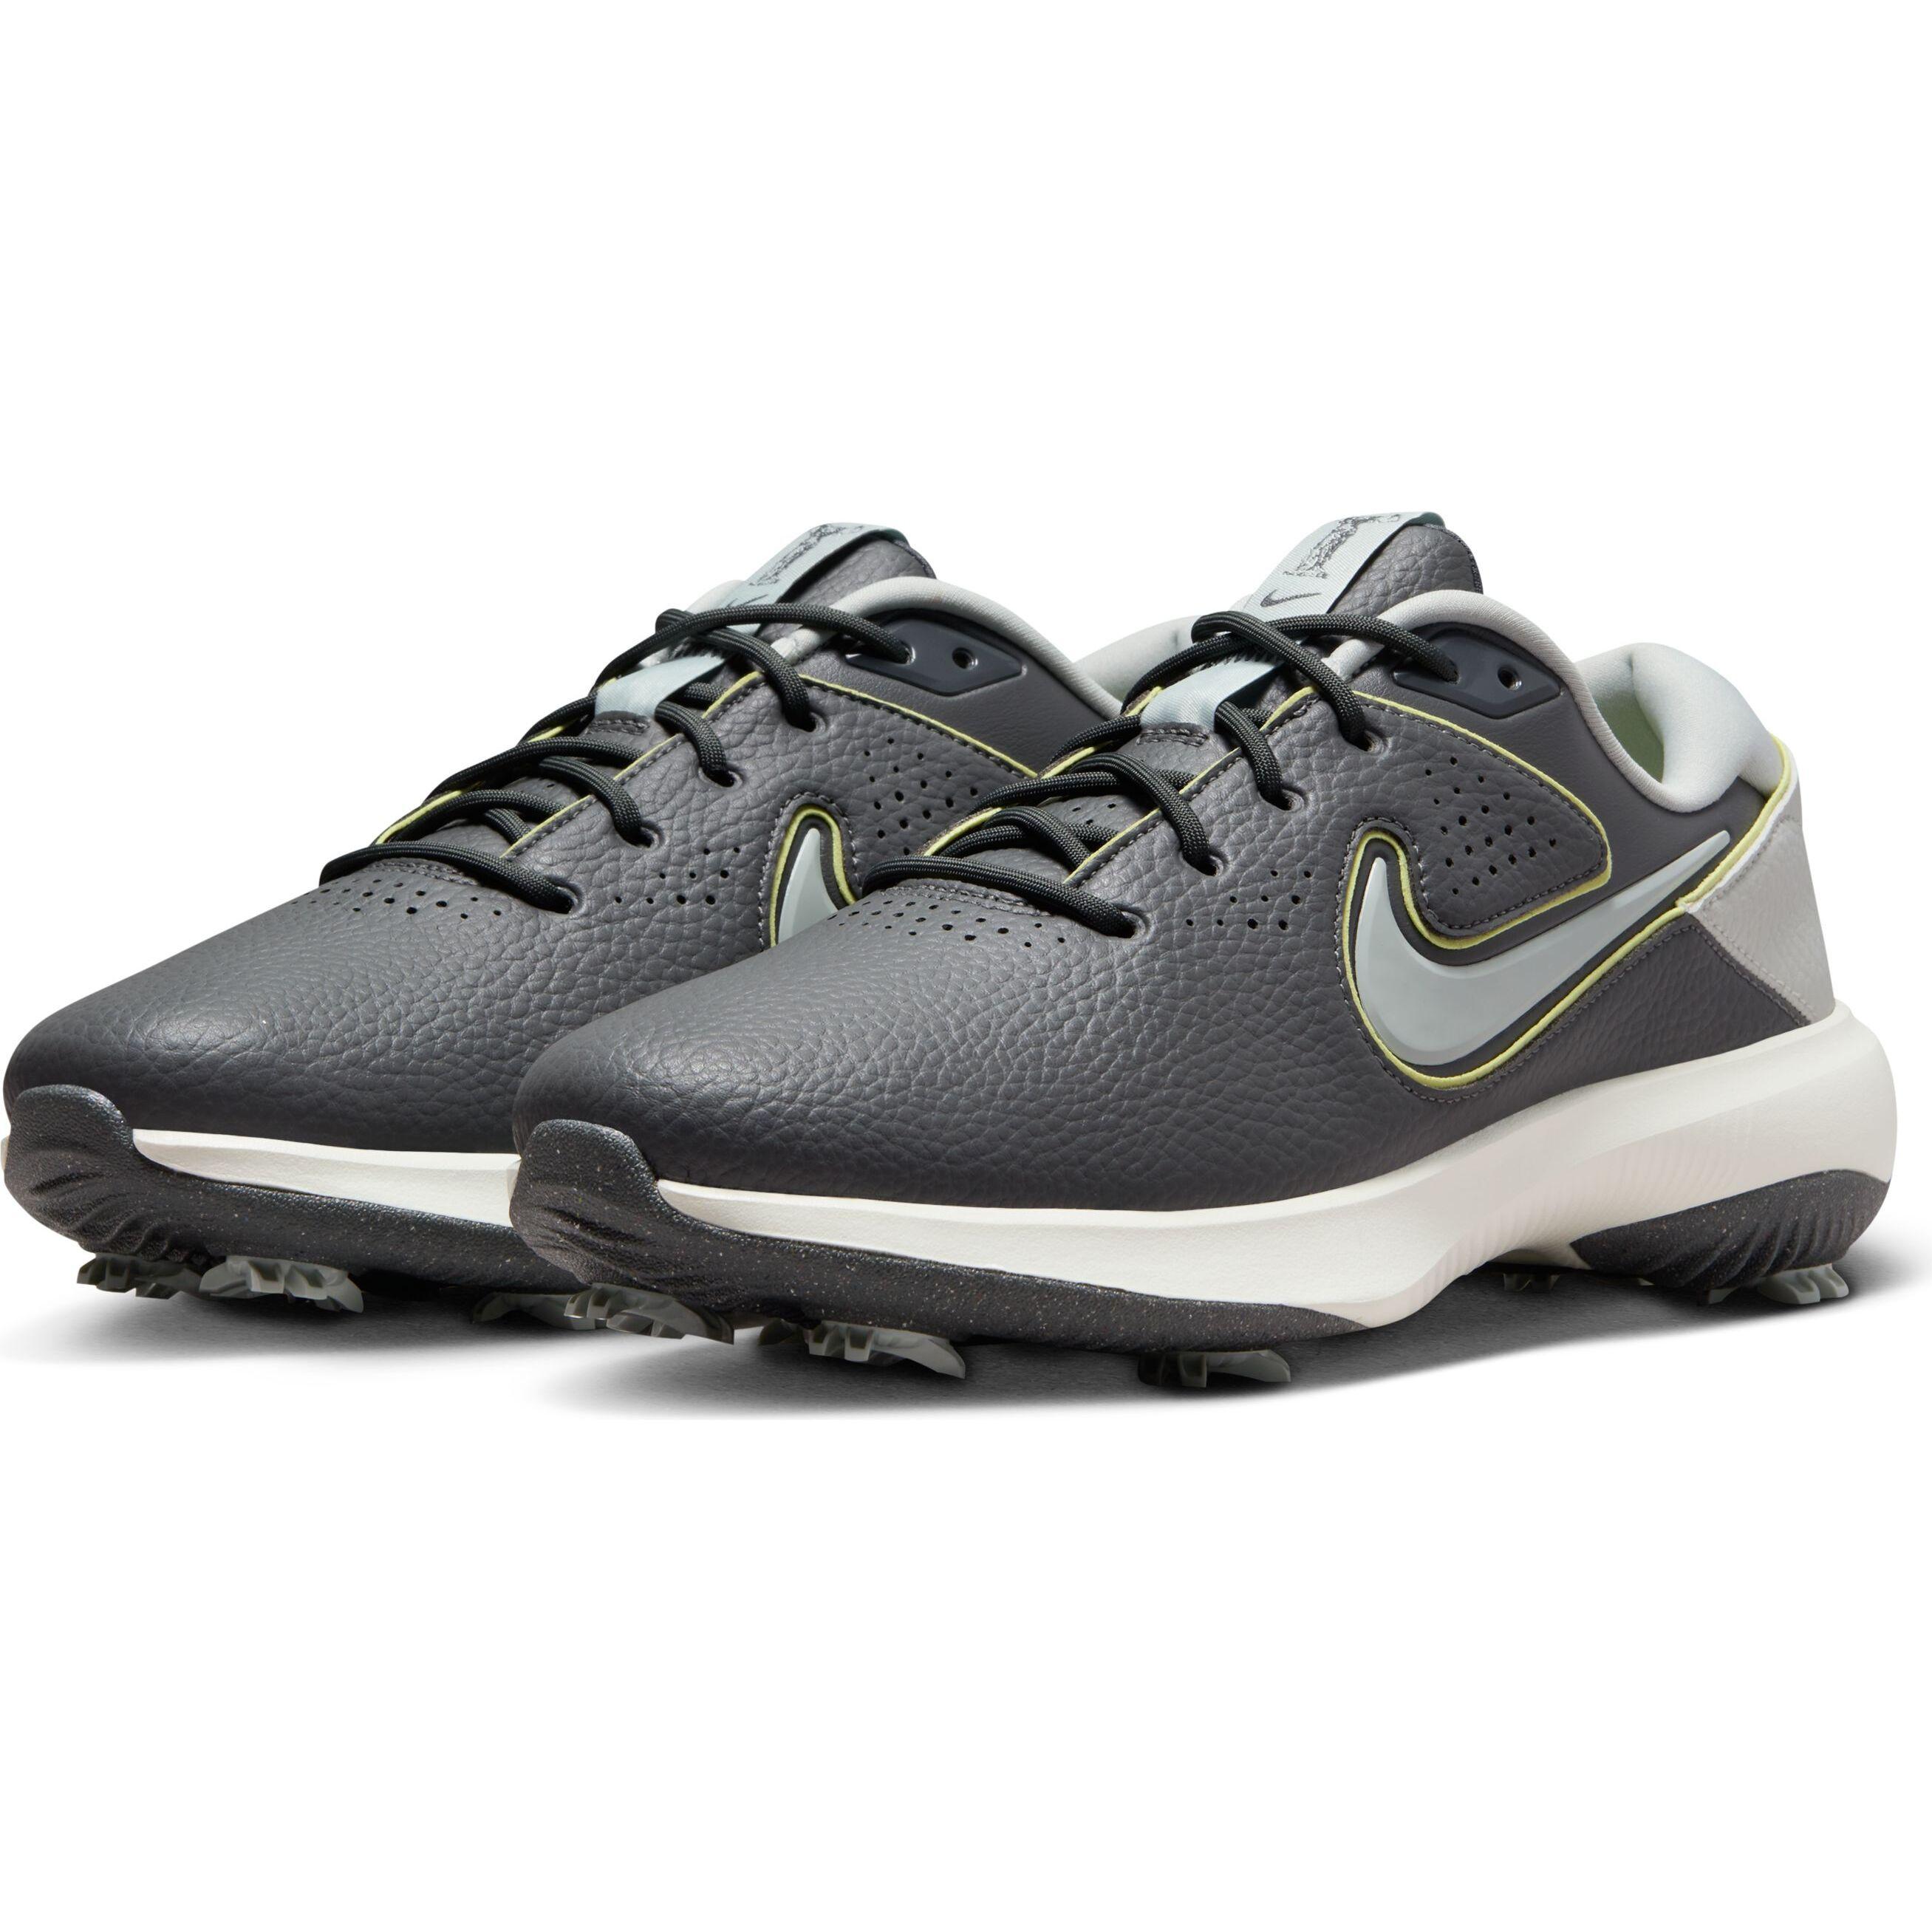 NIKE  Chaussures de golf  Victory Pro 3 